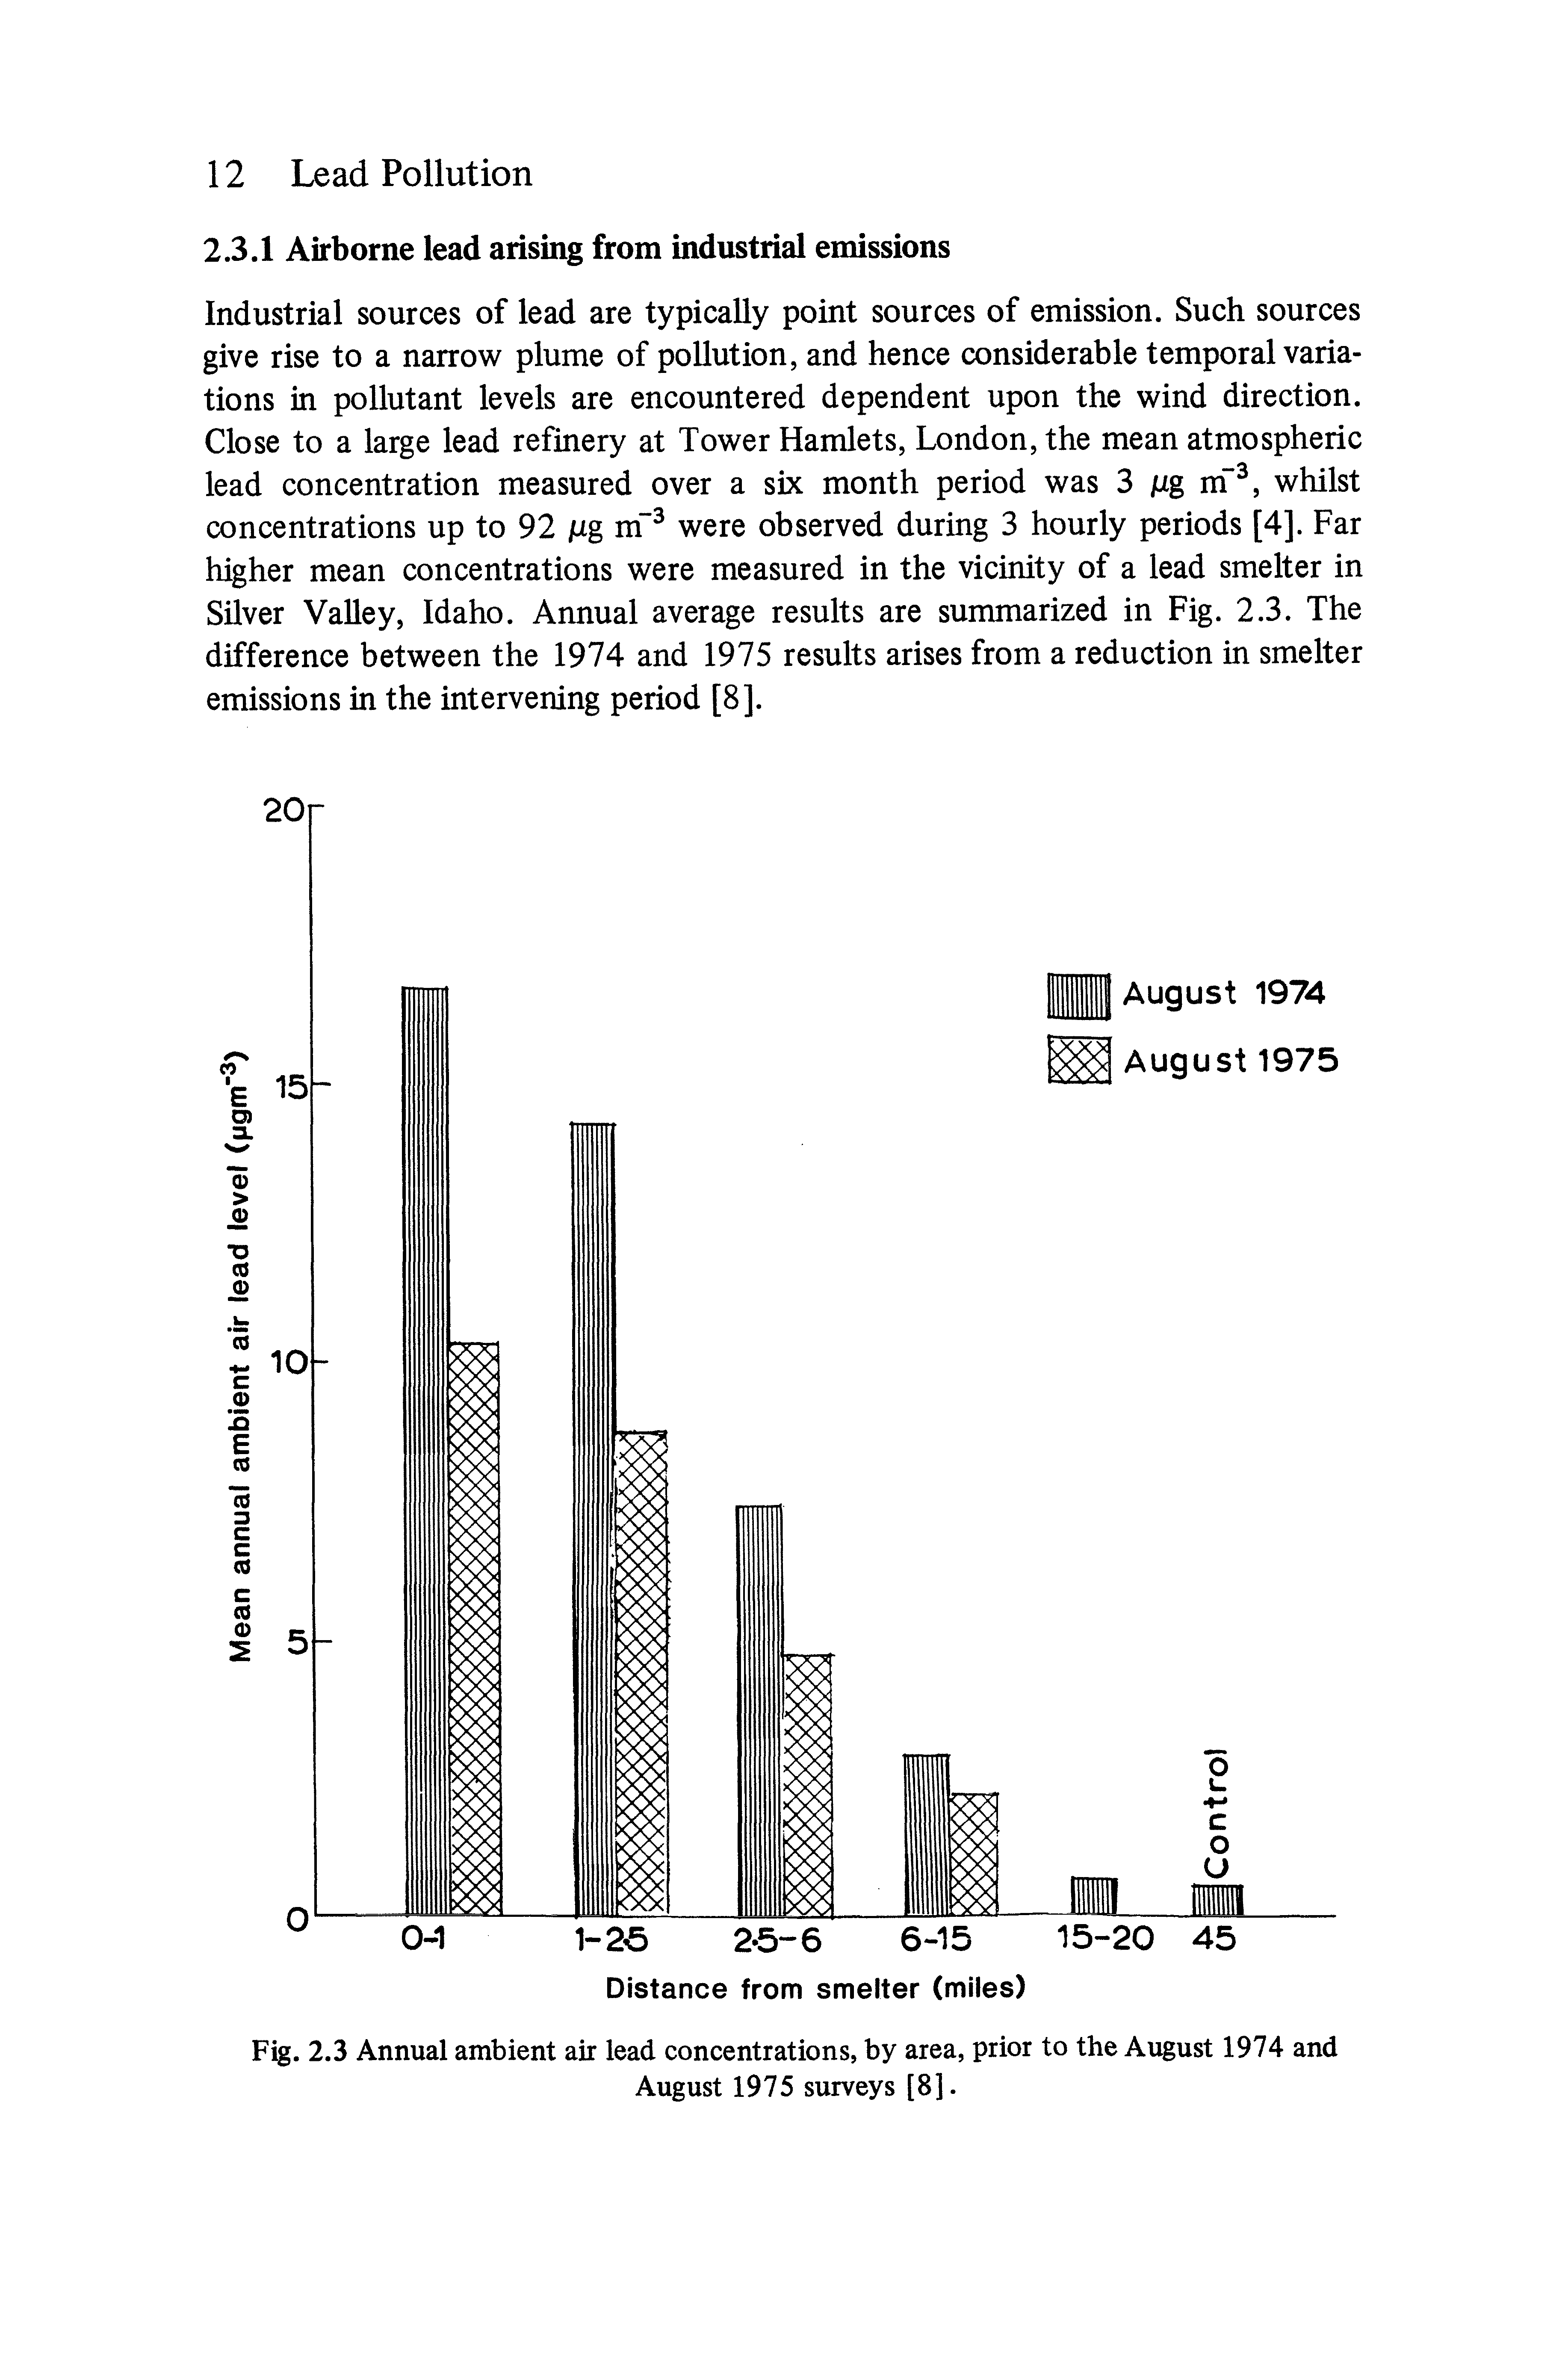 Fig. 2.3 Annual ambient air lead concentrations, by area, prior to the August 1974 and August 1975 surveys [8].